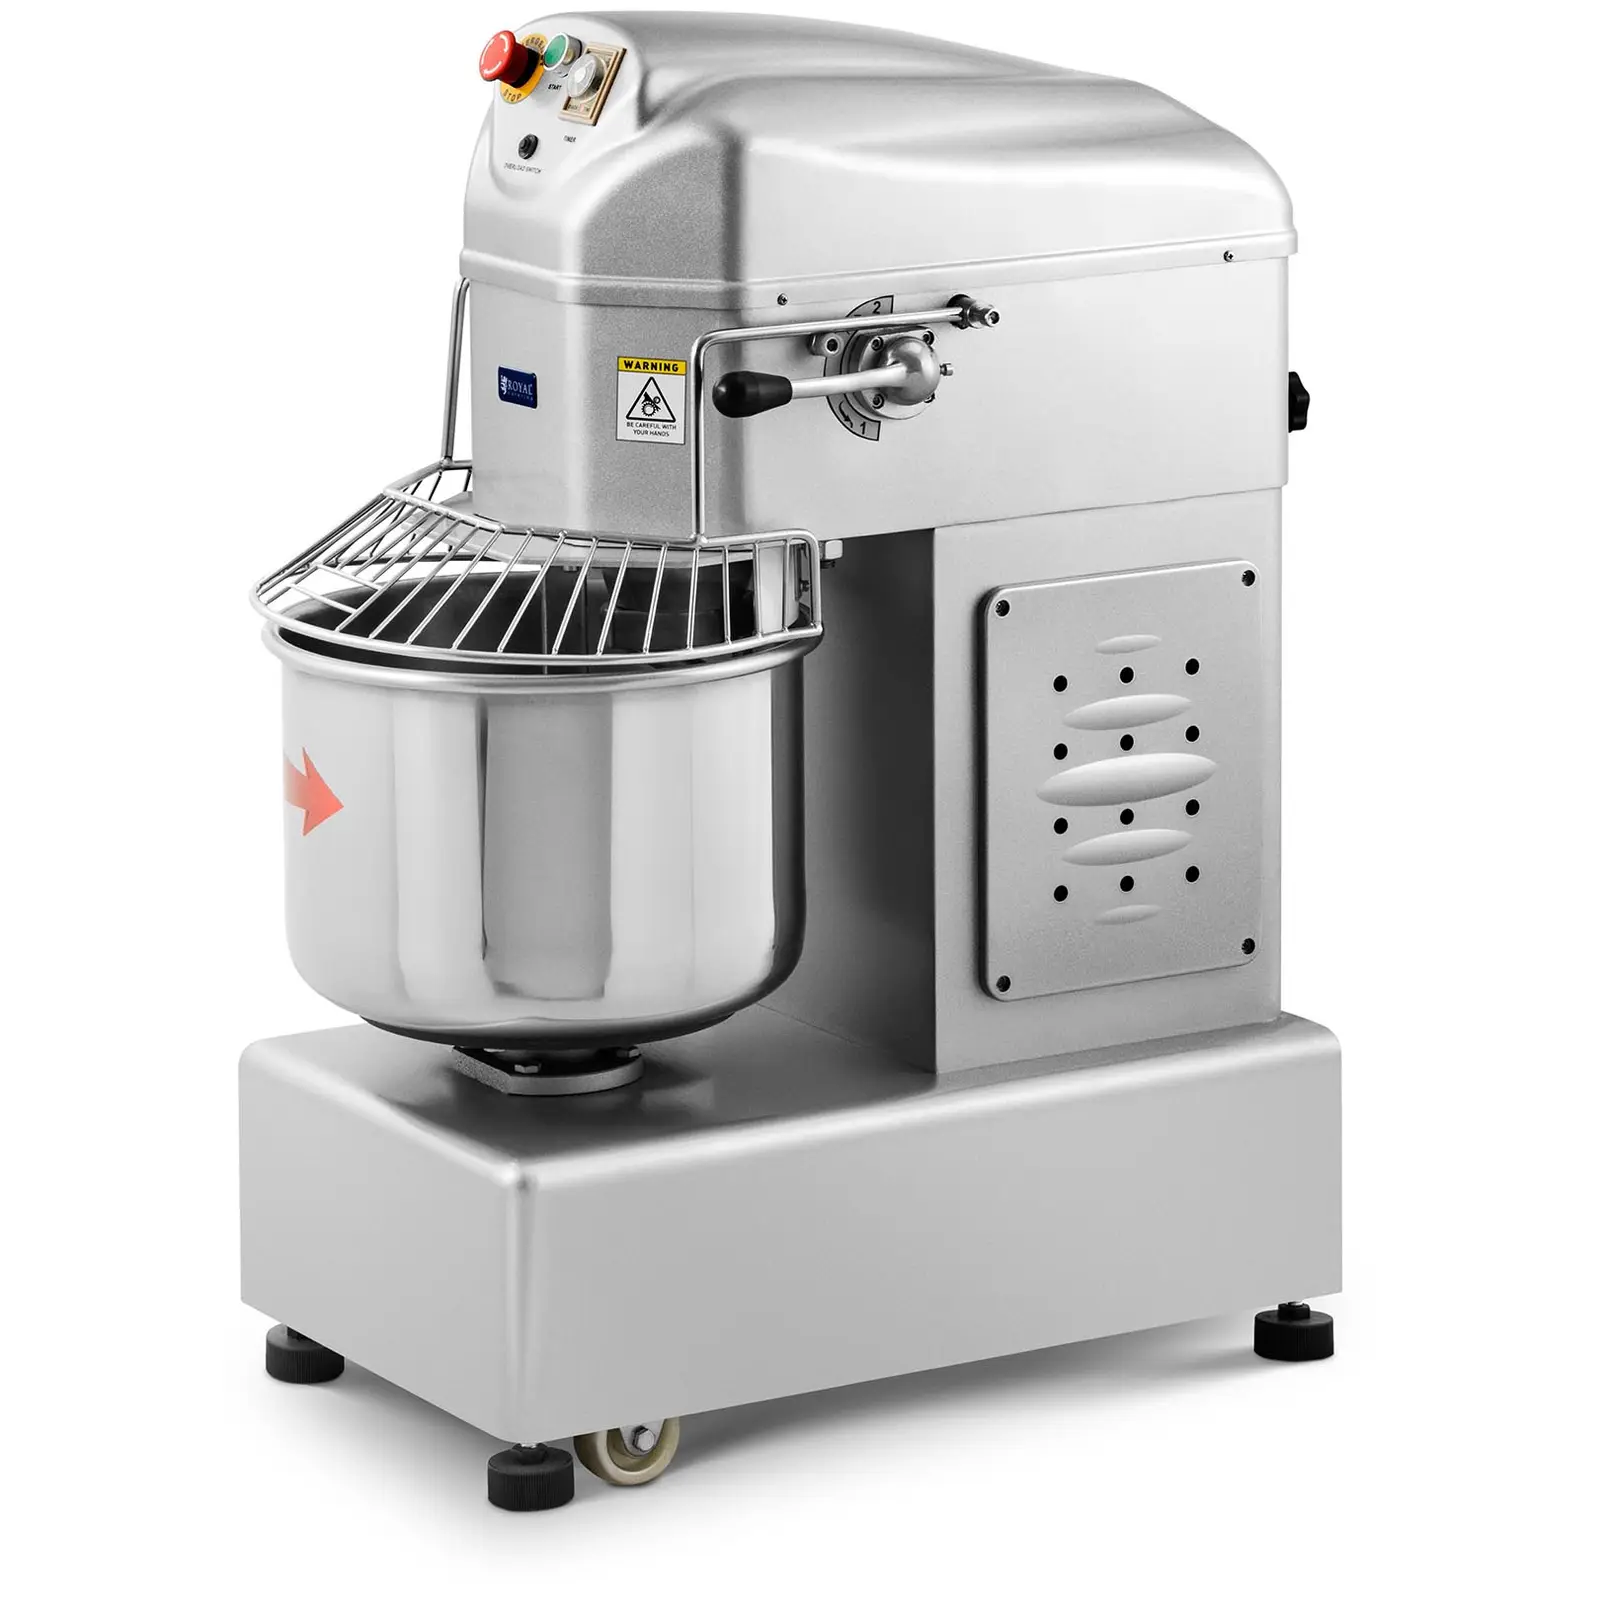 Knetmaschine - 30 L - Royal Catering - 2100 W